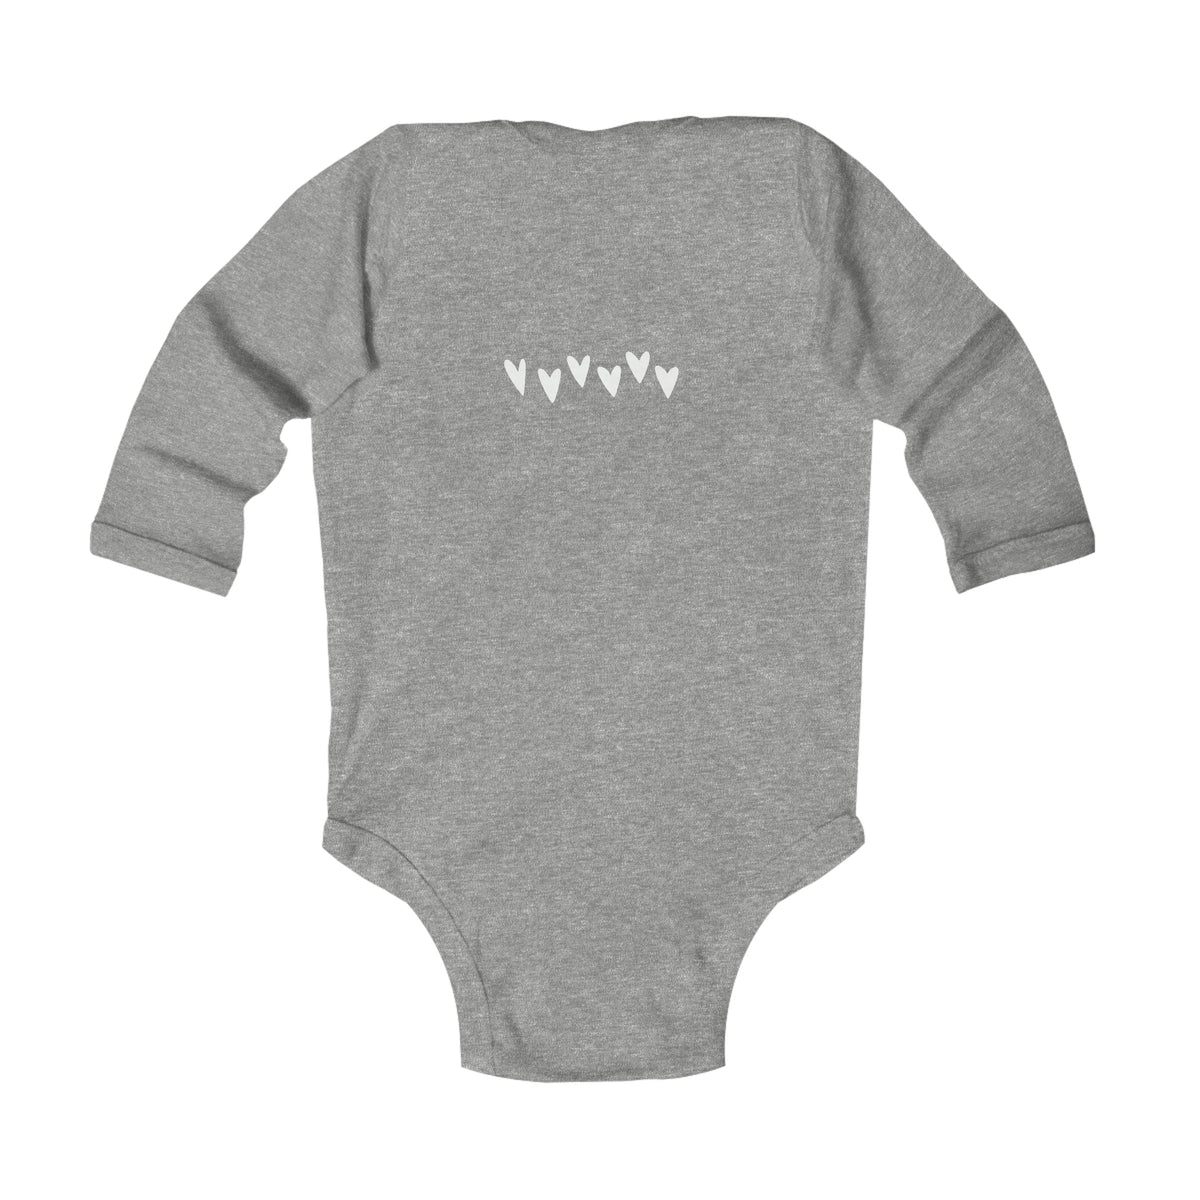 Love You More Onesie, I Love You Baby, Love Gifts Pullover, Valentines Baby Shirt, Gifts for Baby,